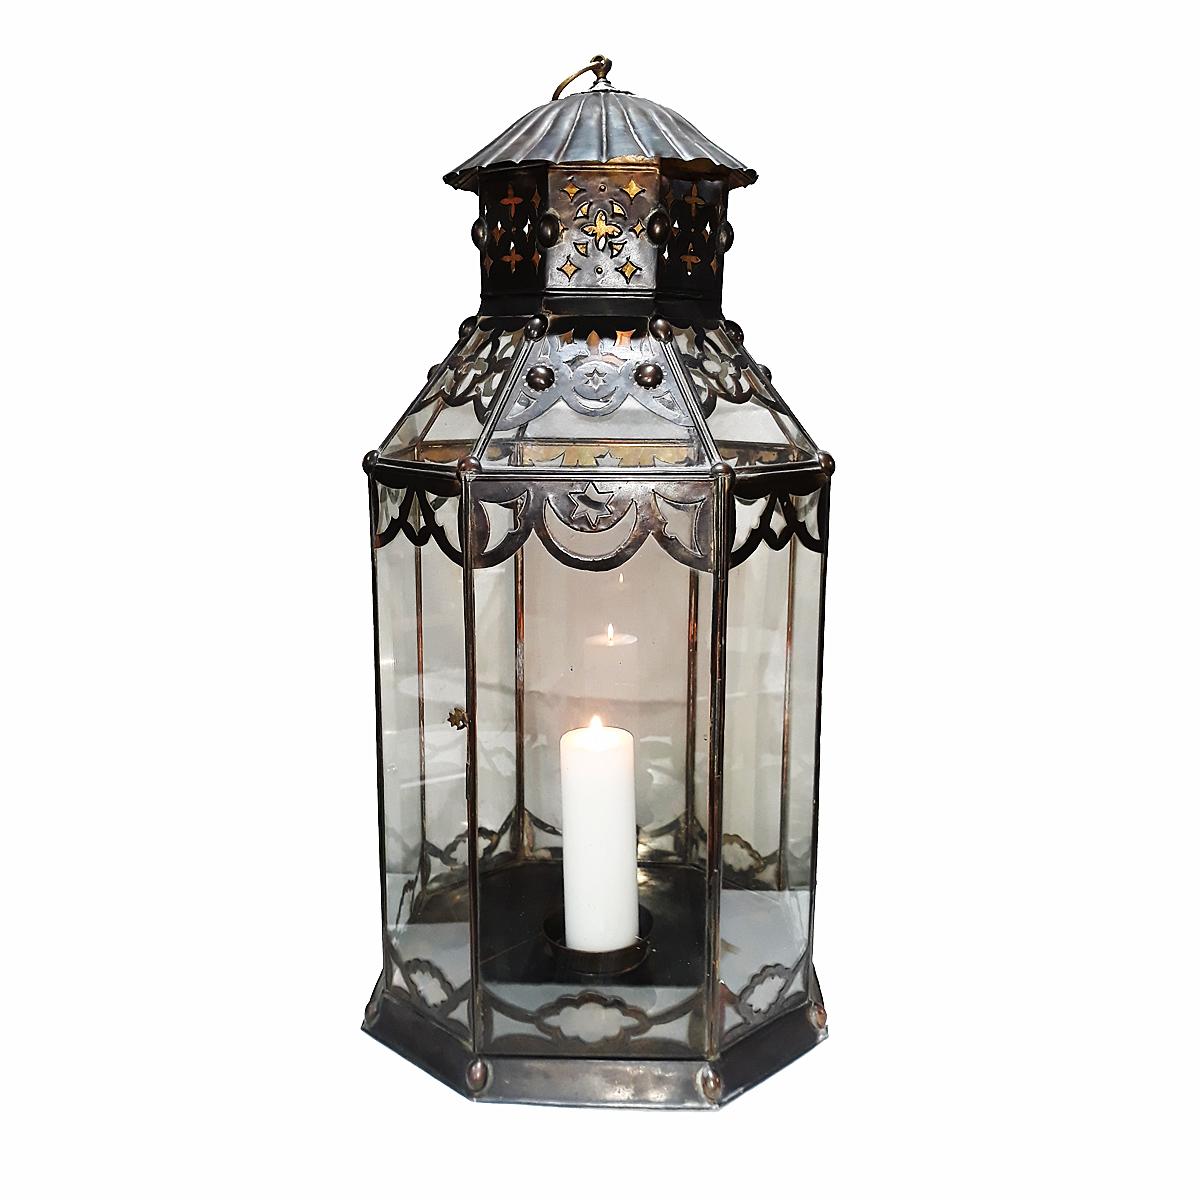 A tall lantern, handcrafted in Turkey. Made of metal and glass, with intricately carved details and candle holder in the center, for a 3-inch candle. Dimensions: 36